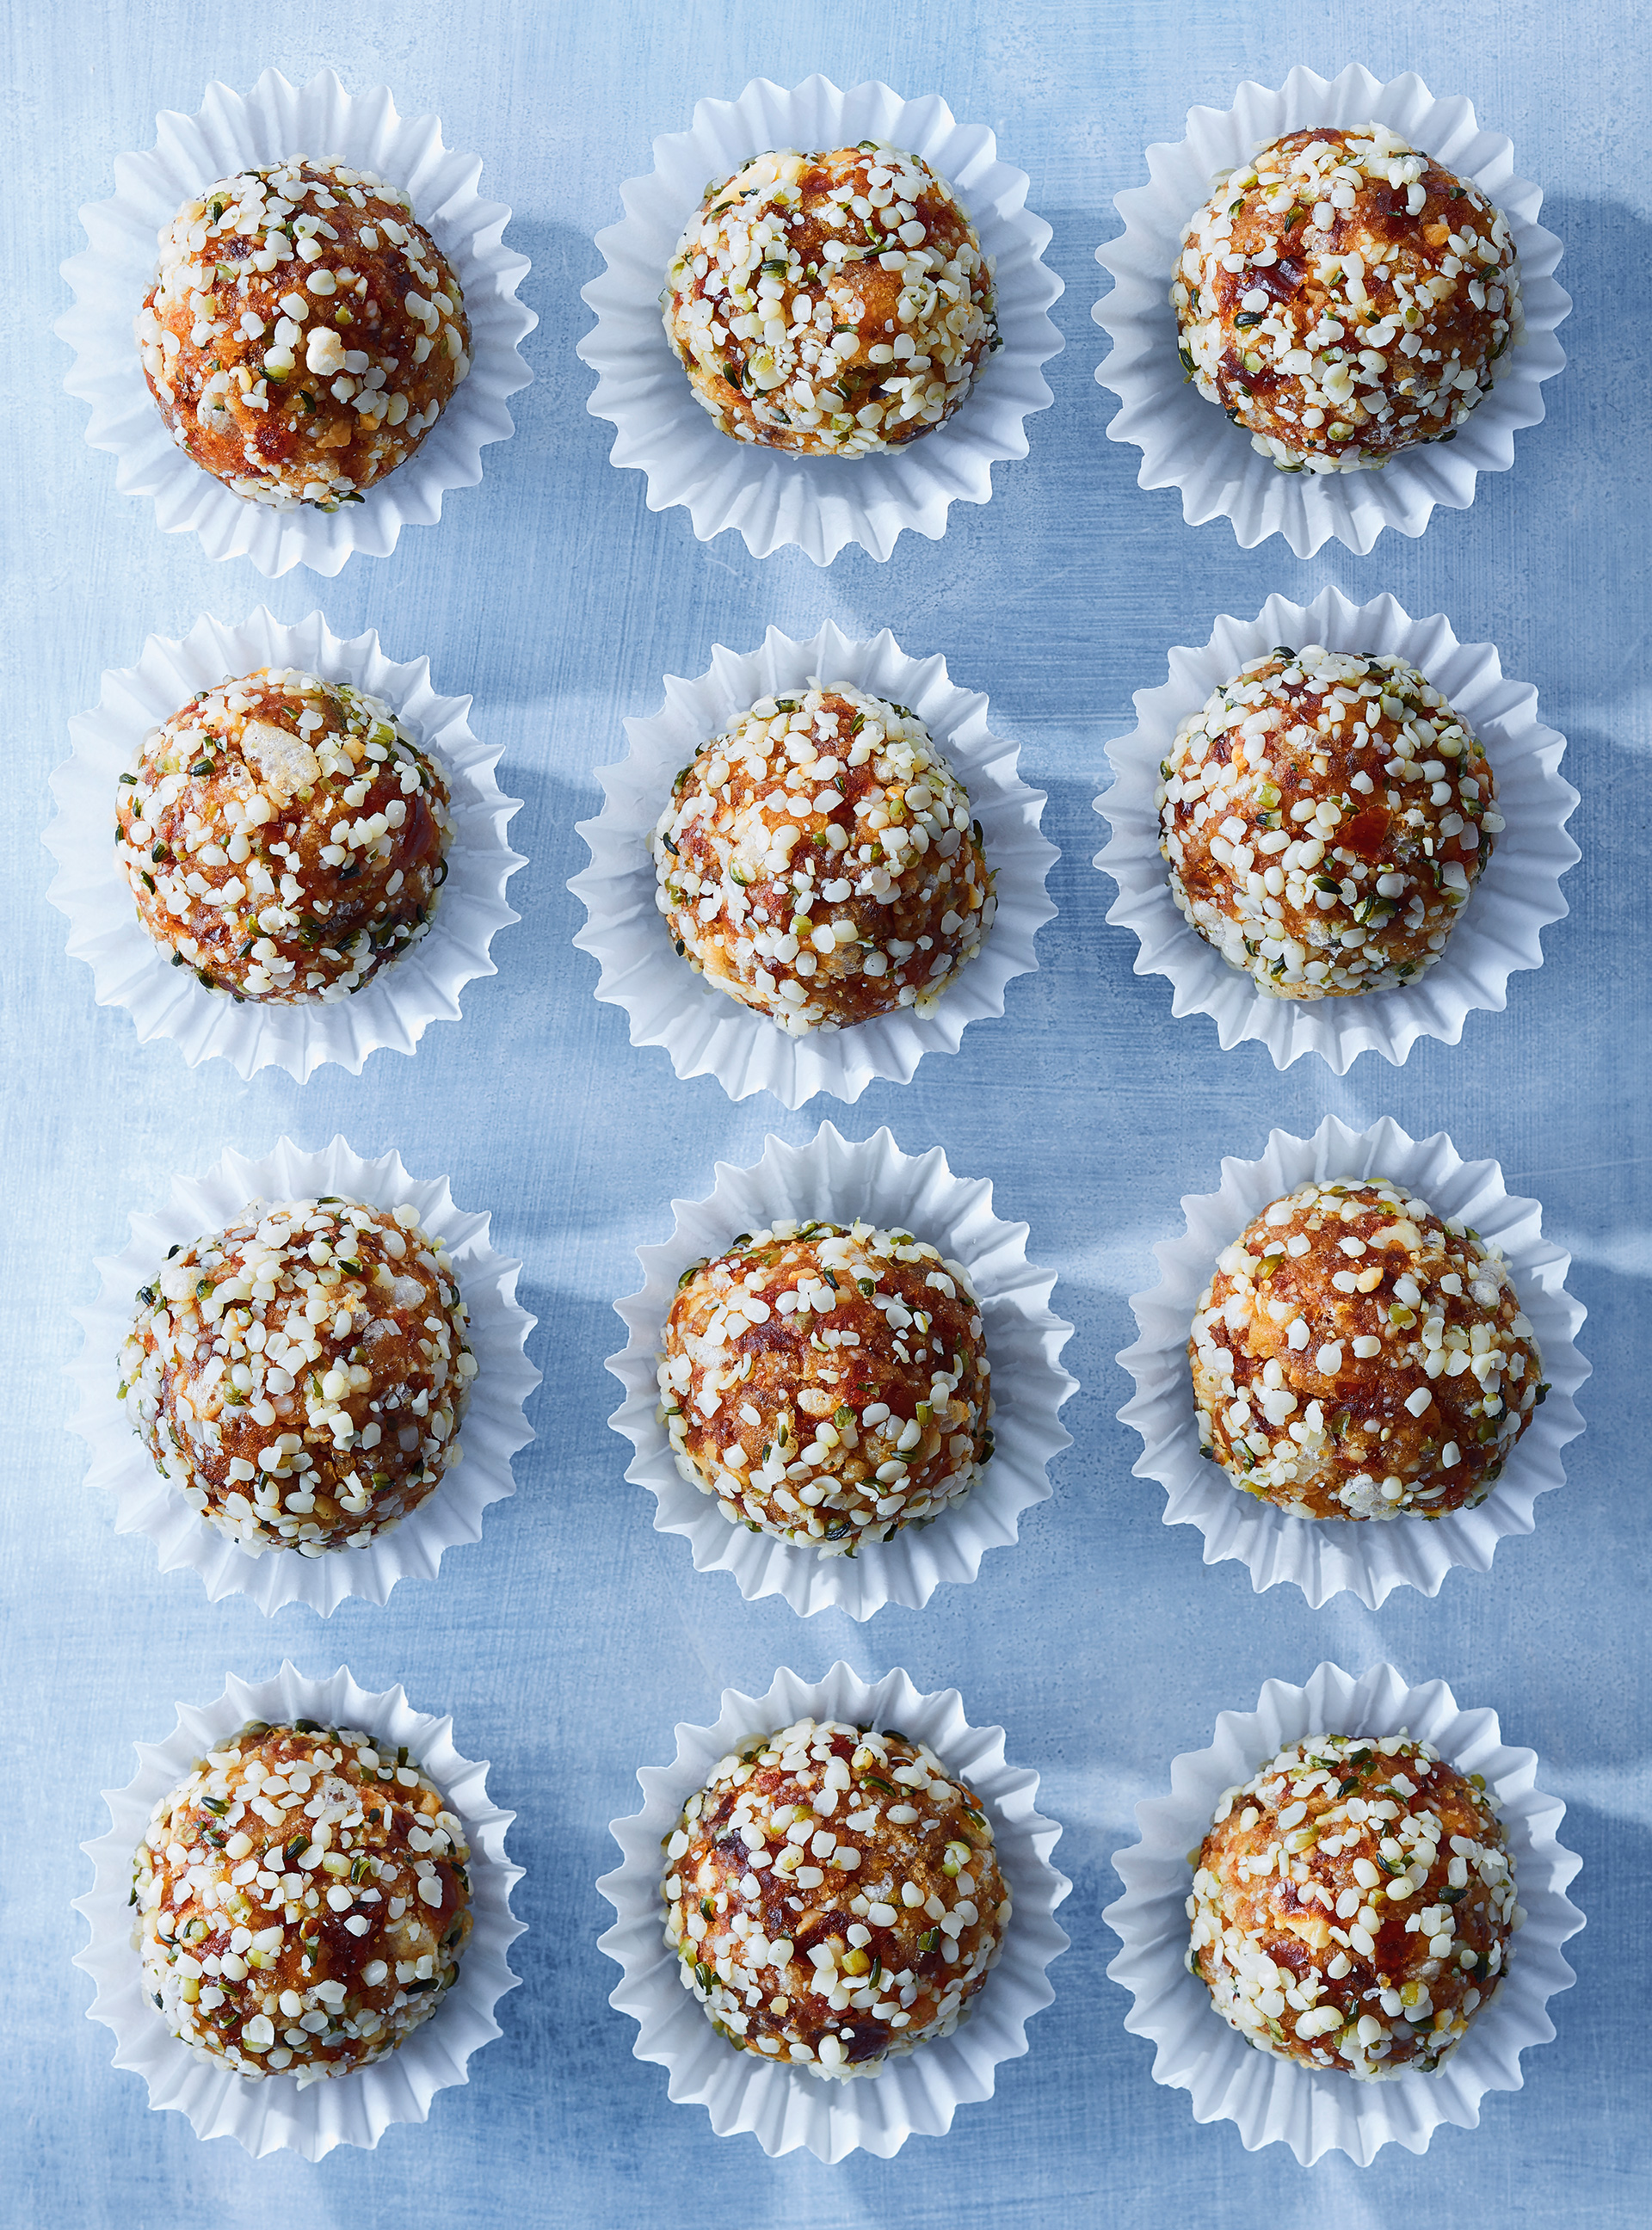 Date and Cashew Energy Balls